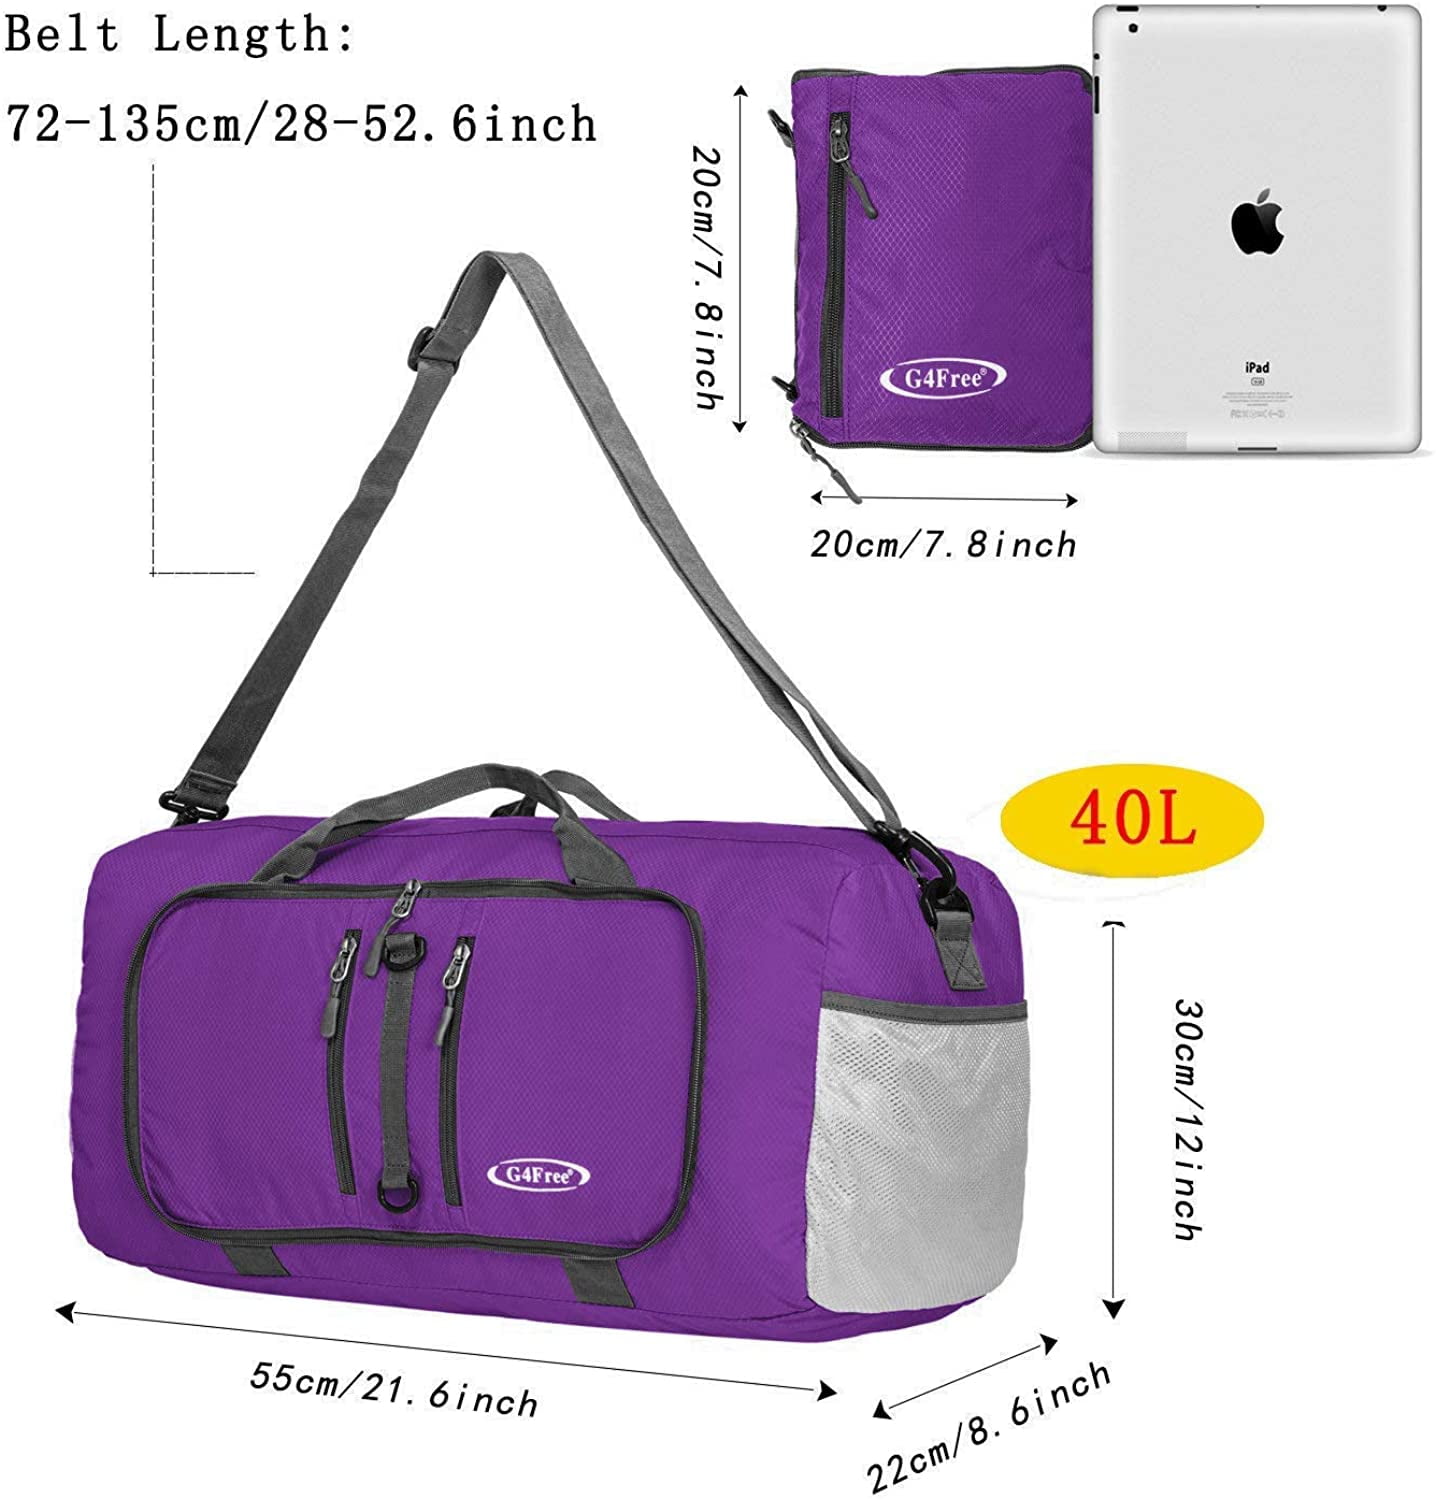 Gym,Swimming G4Free Foldable Travel Duffle Bag Lightweight 22 Inch Luggage Tote Bag for Sports 